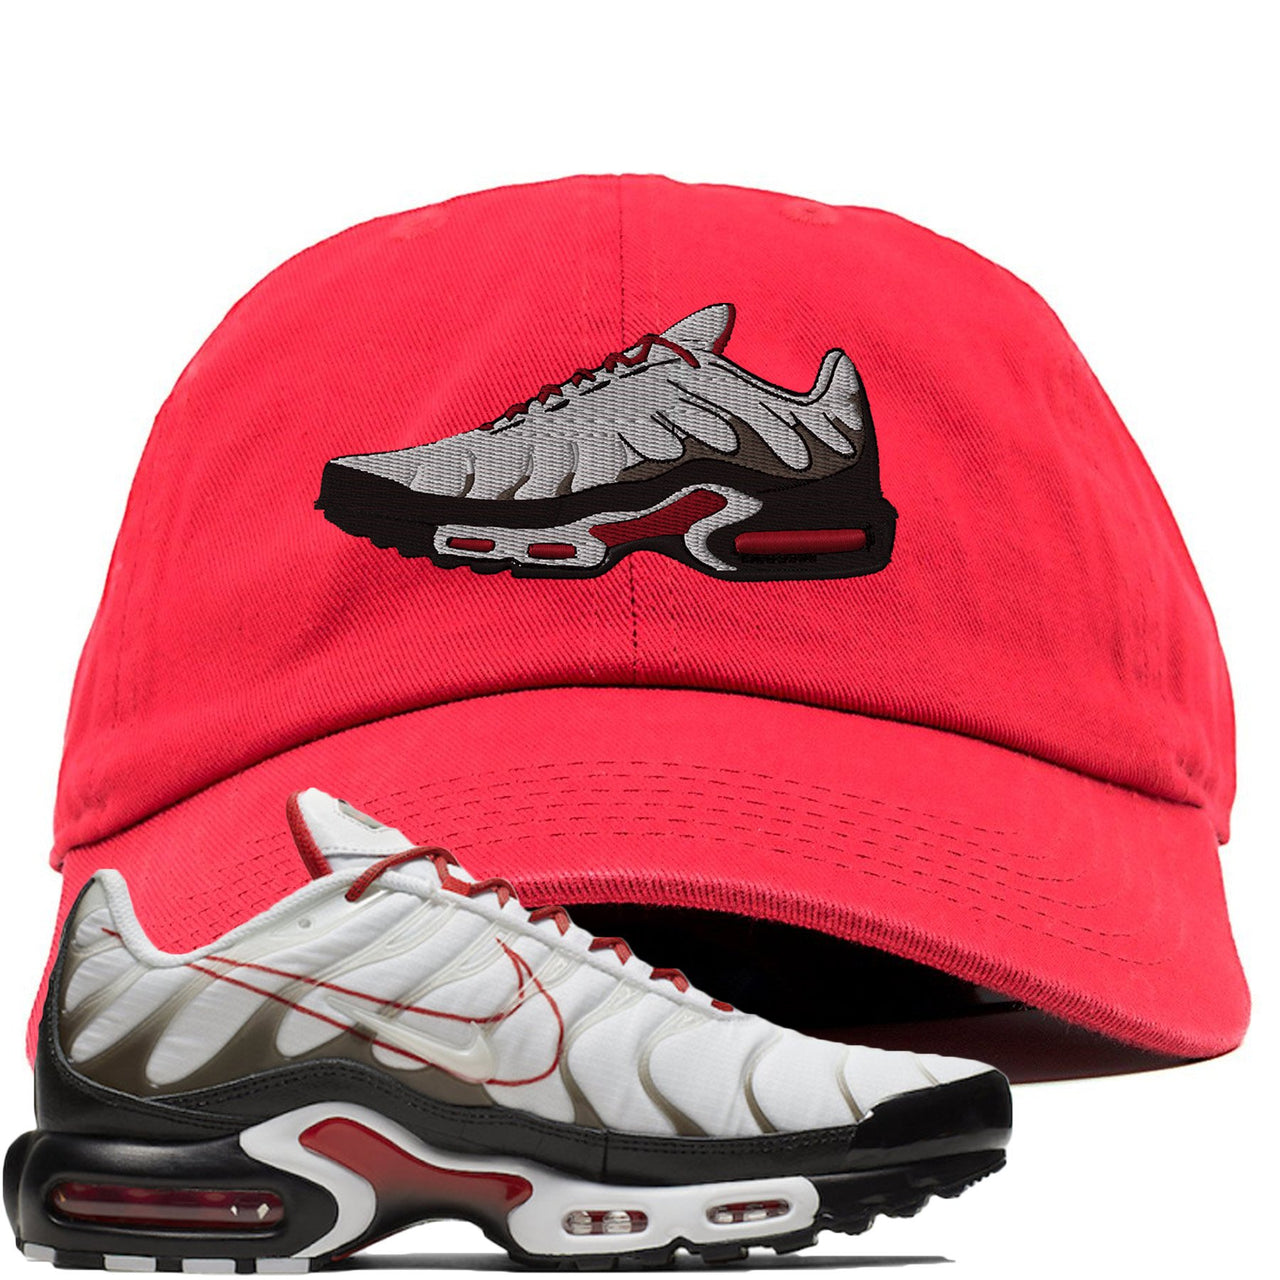 White University Red Pluses Dad Hat | Shoe, Red